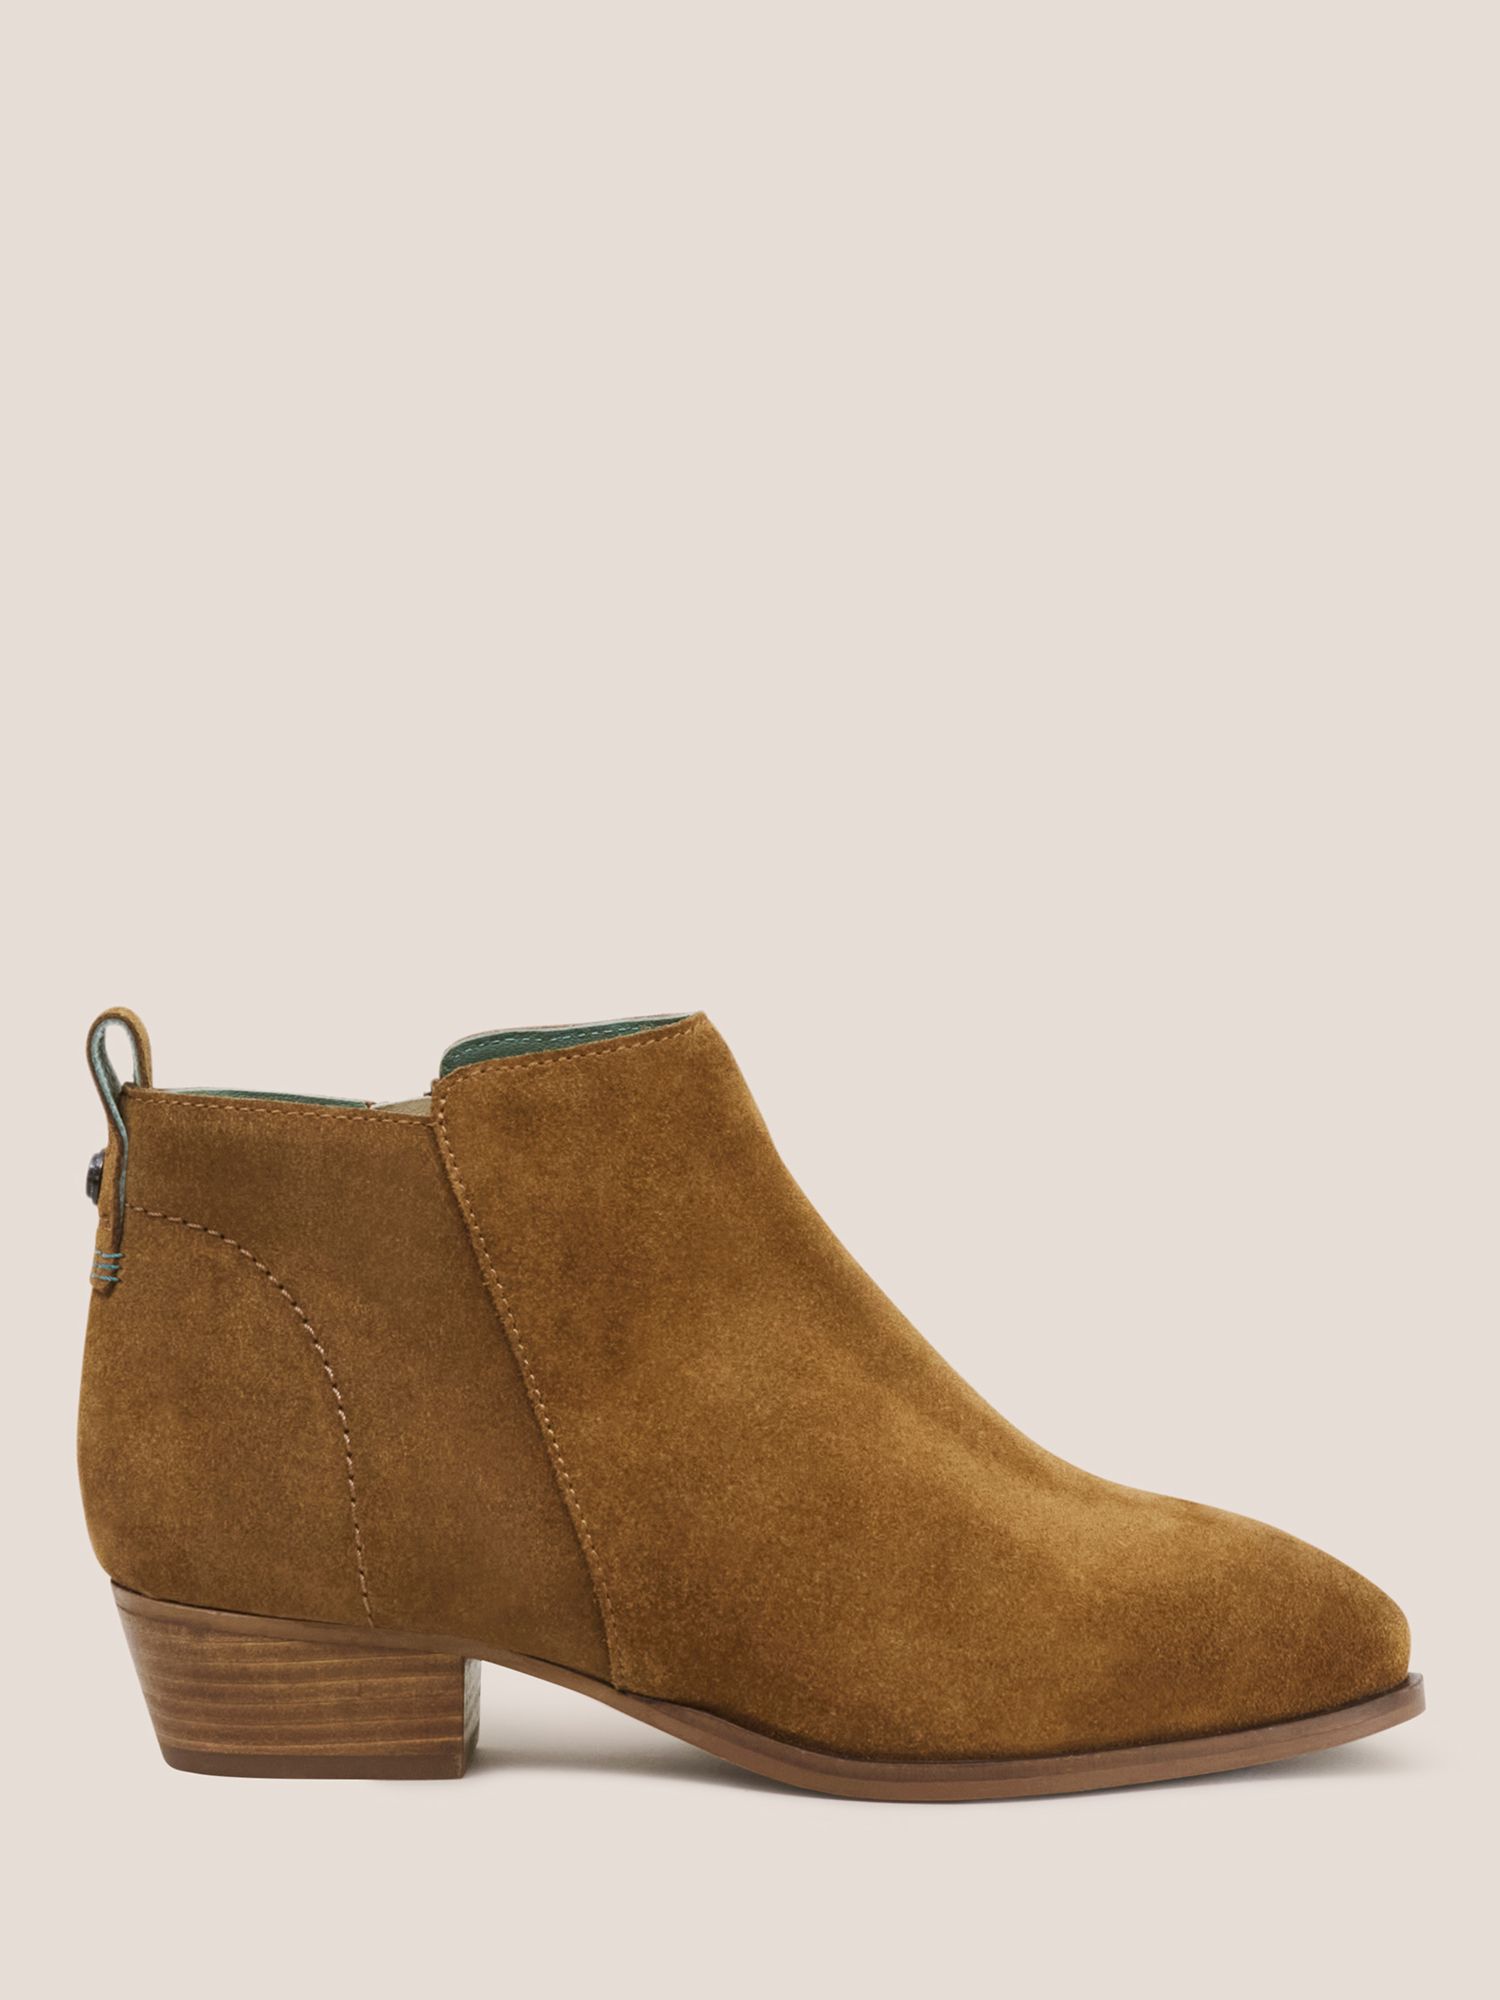 White Stuff Willow Suede Ankle Boots, Dark Tan at John Lewis & Partners